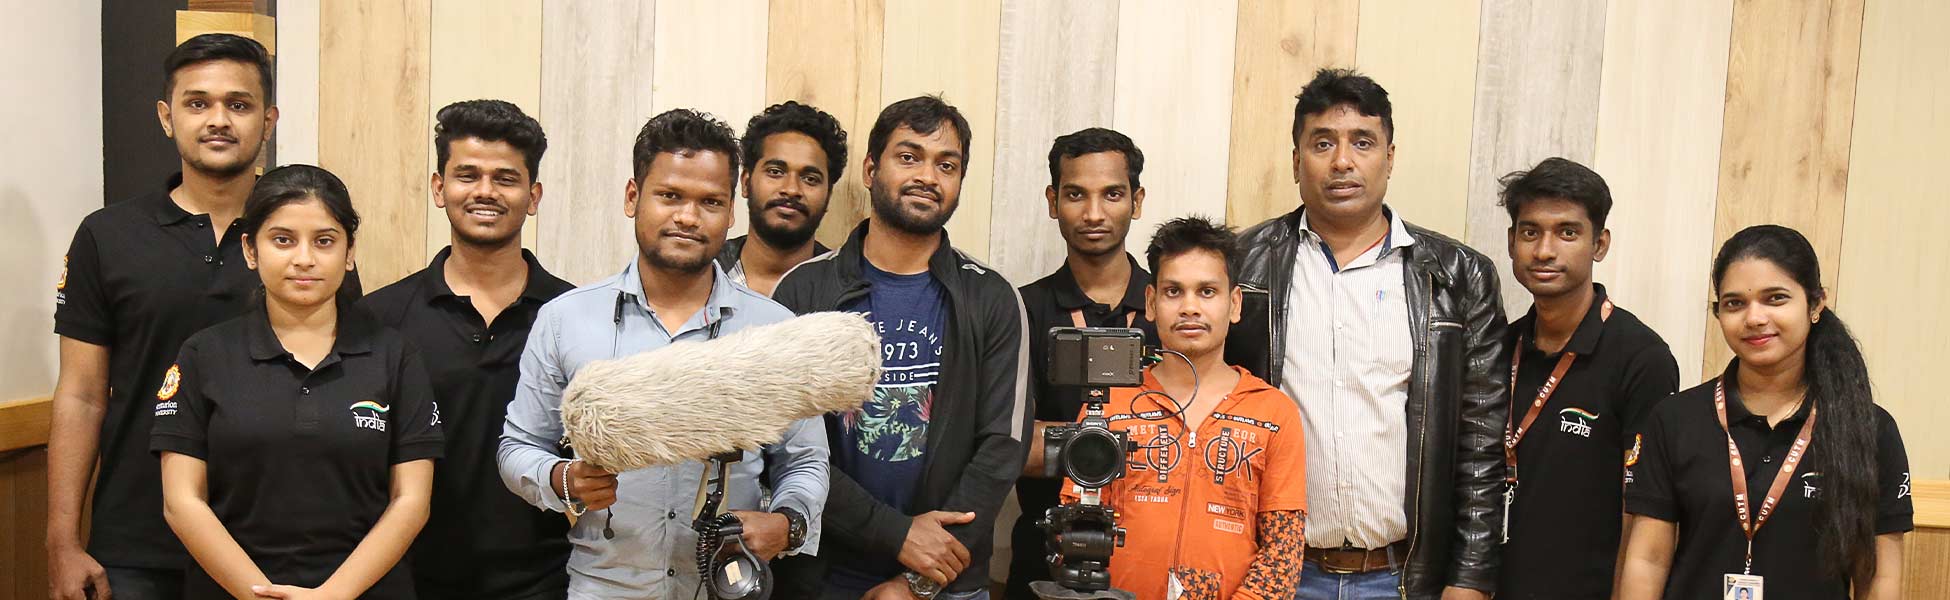 film production services in Jhansi, video production services in Jhansi, tv production services in Jhansi, production services in Jhansi